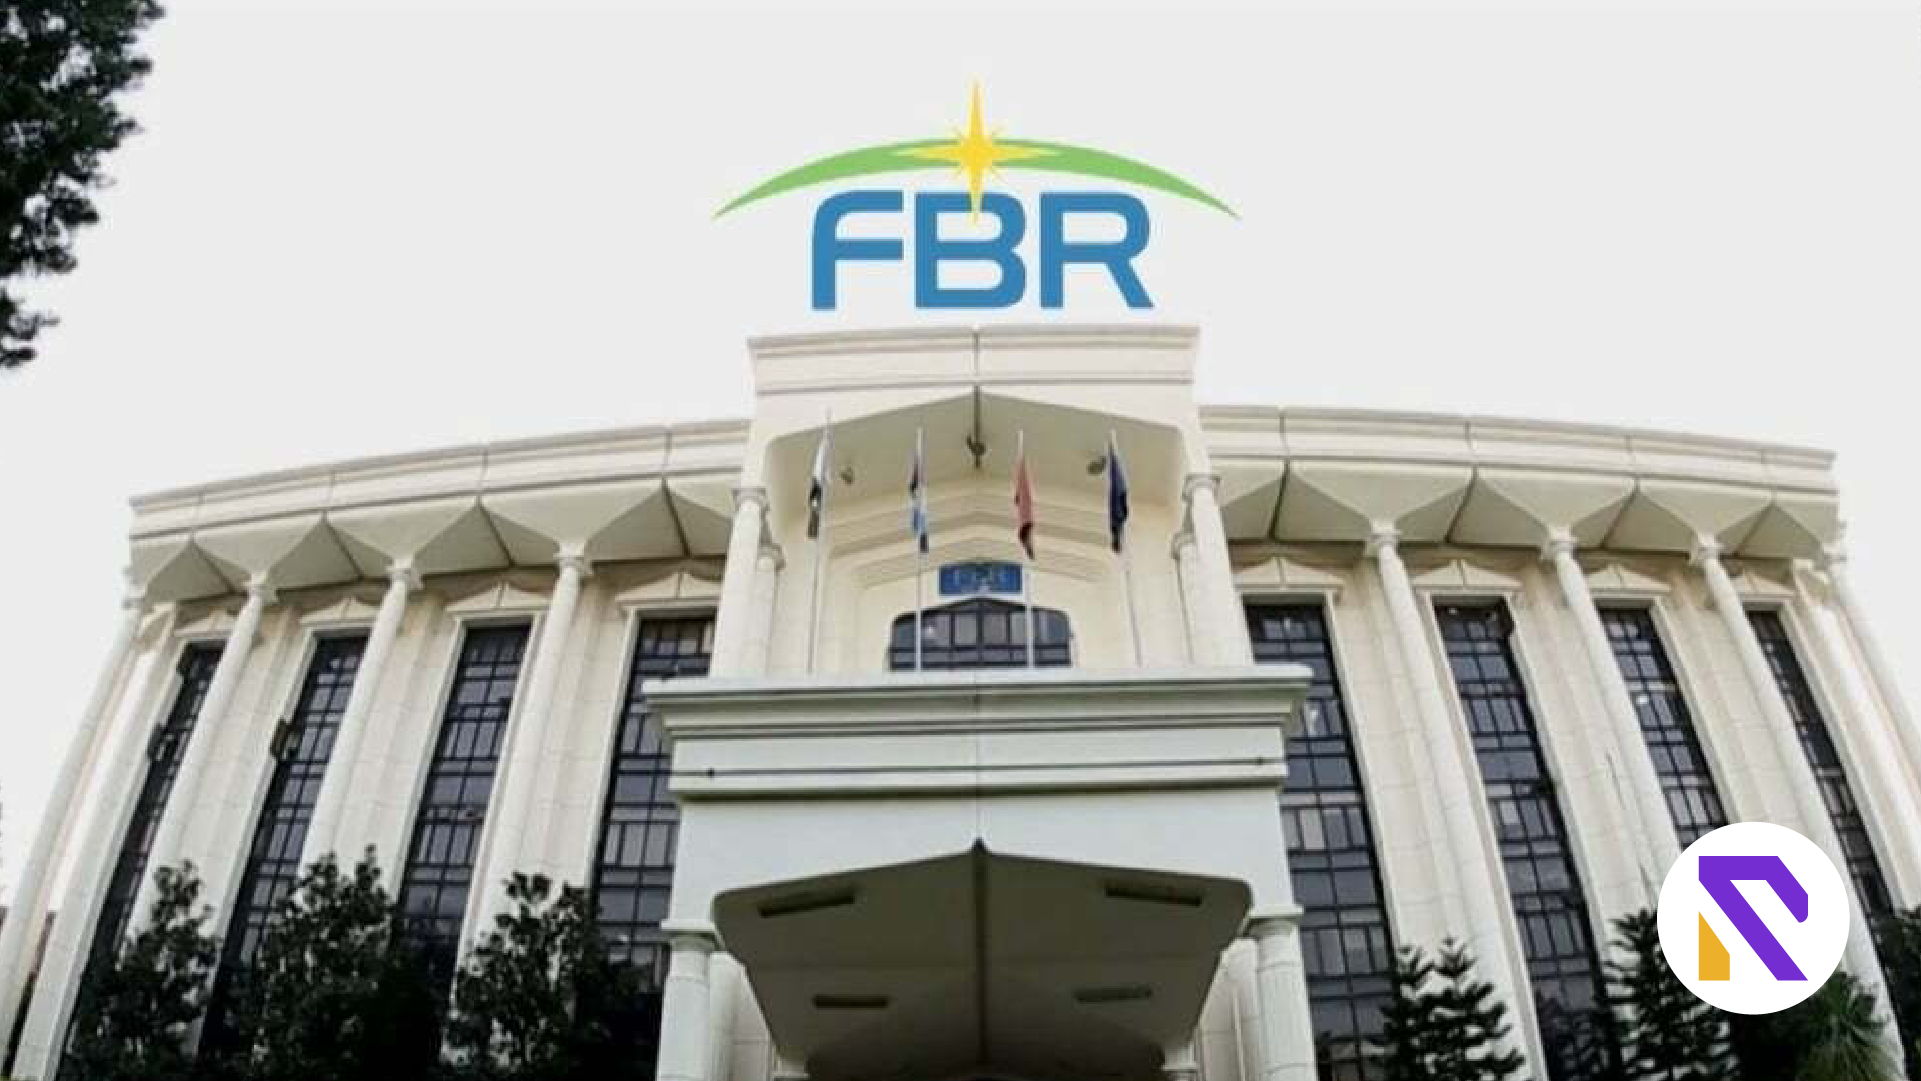 FBR collected PKR 81 billion during the FY 2021-22 from property transactions